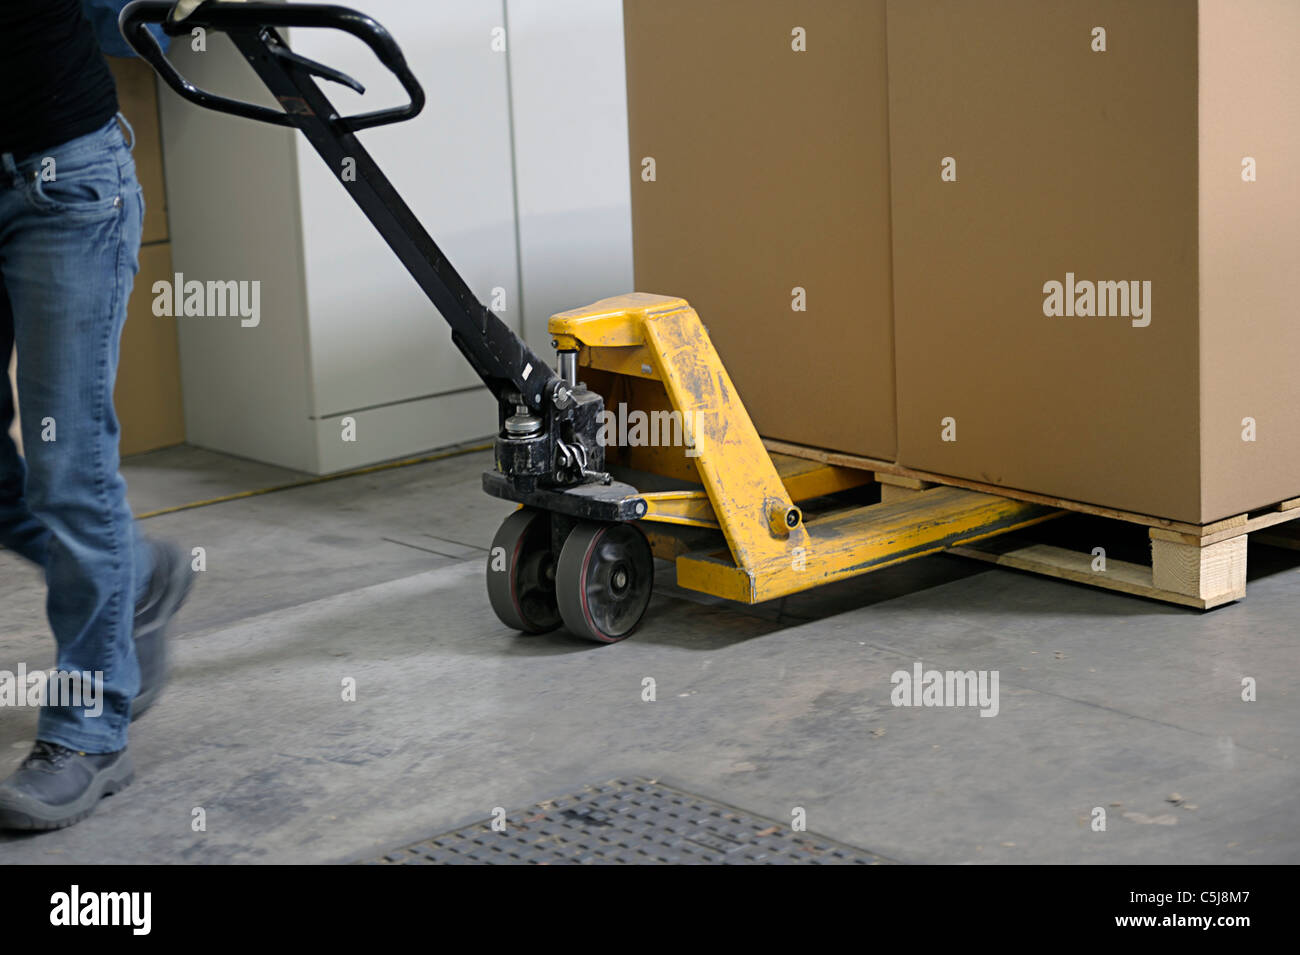 pallet truck with carton boxes Stock Photo